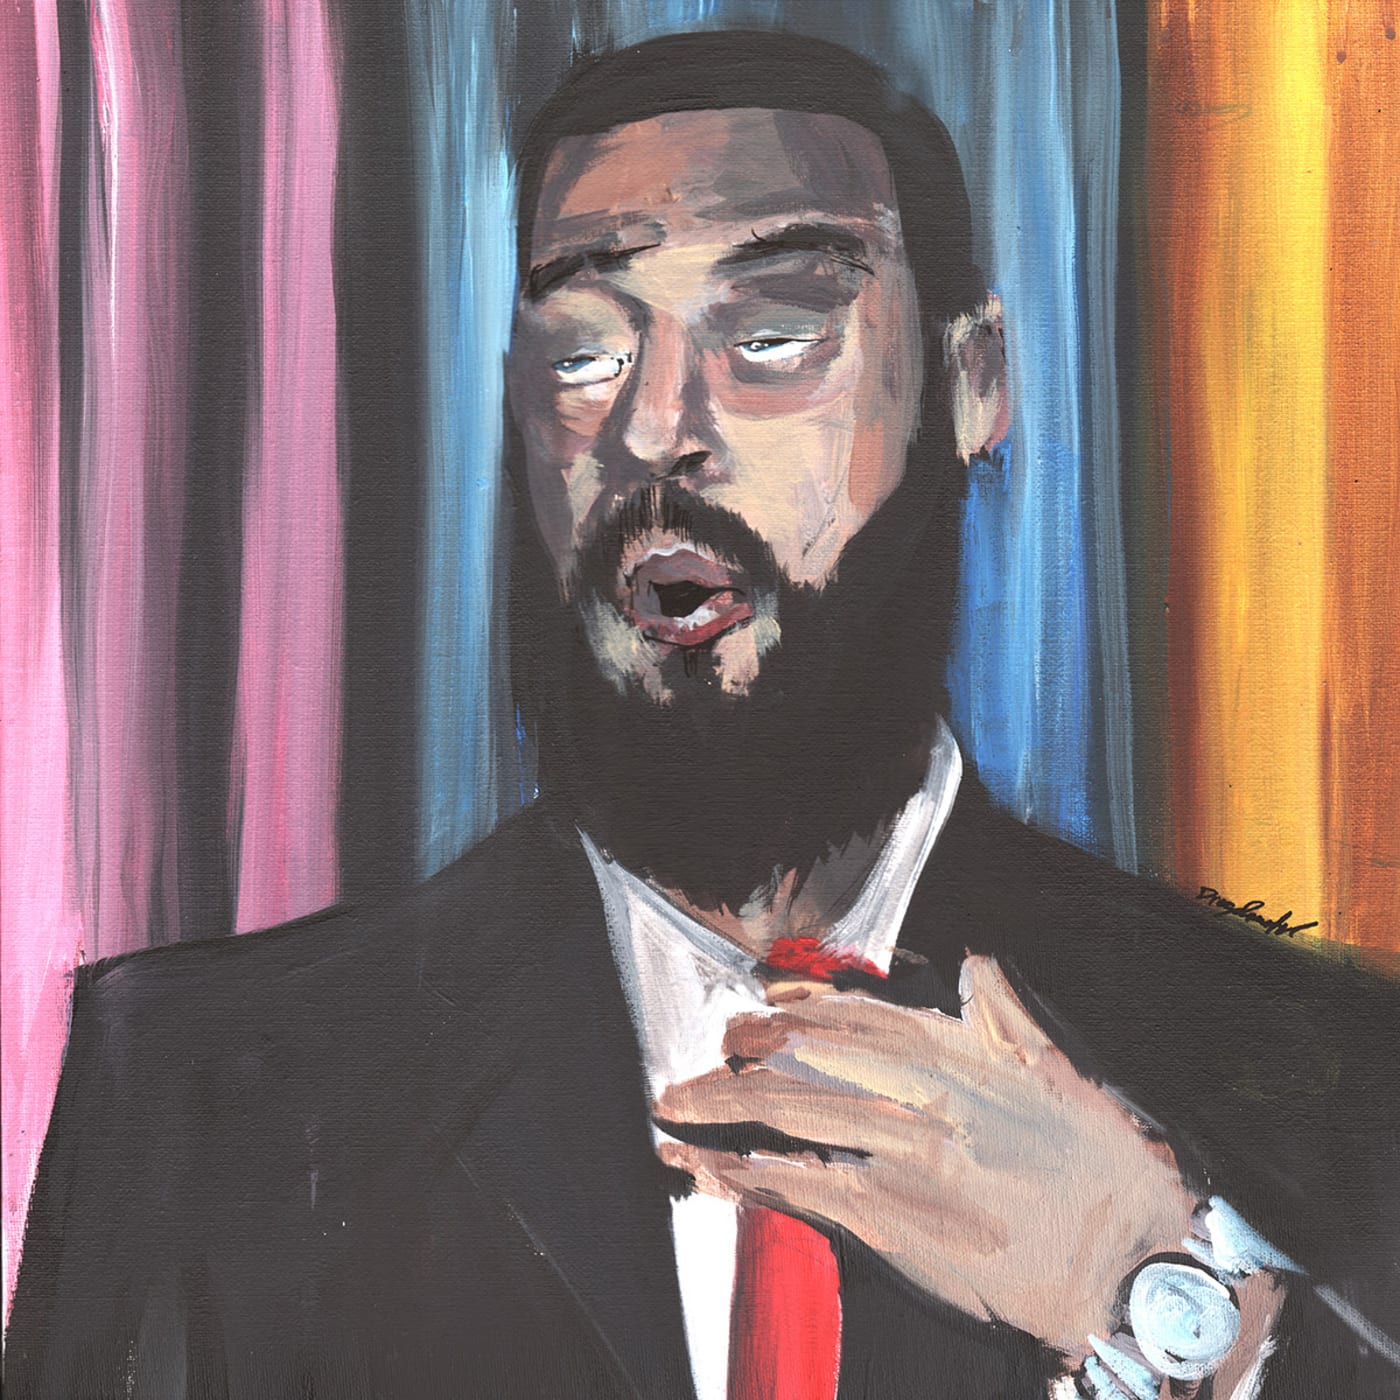 The cover art for Your Old Droog's 'Yodney Dangerfield' album